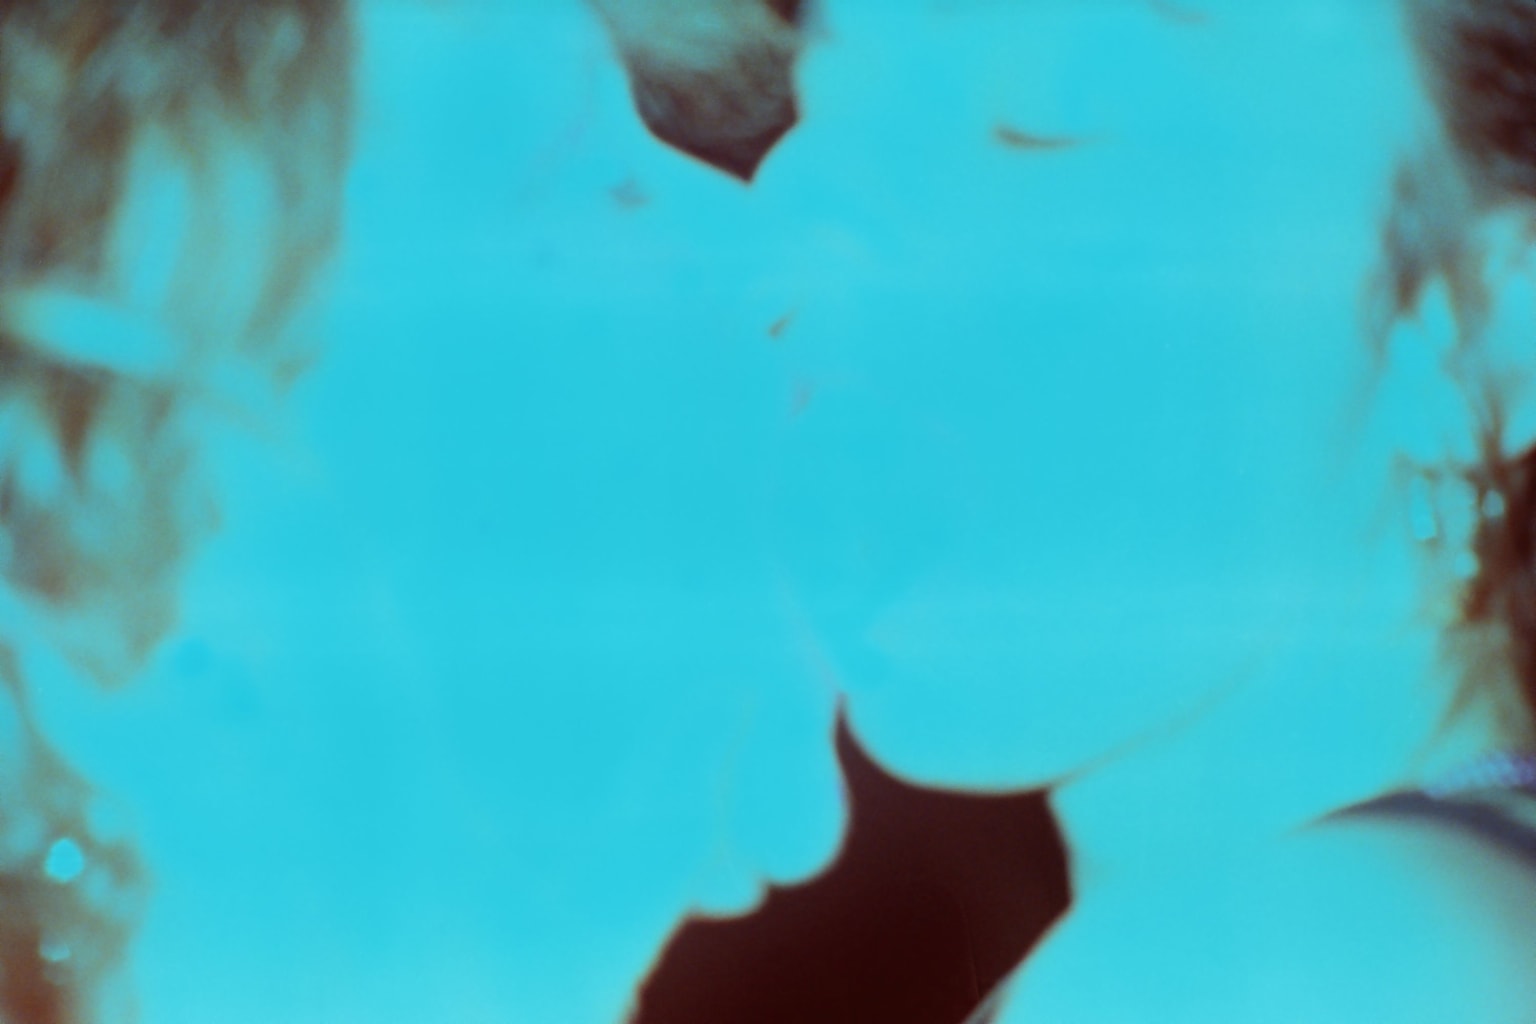 An over-exposed, cyan-tinted film photograph which shows a close up frame of two faces kissing.